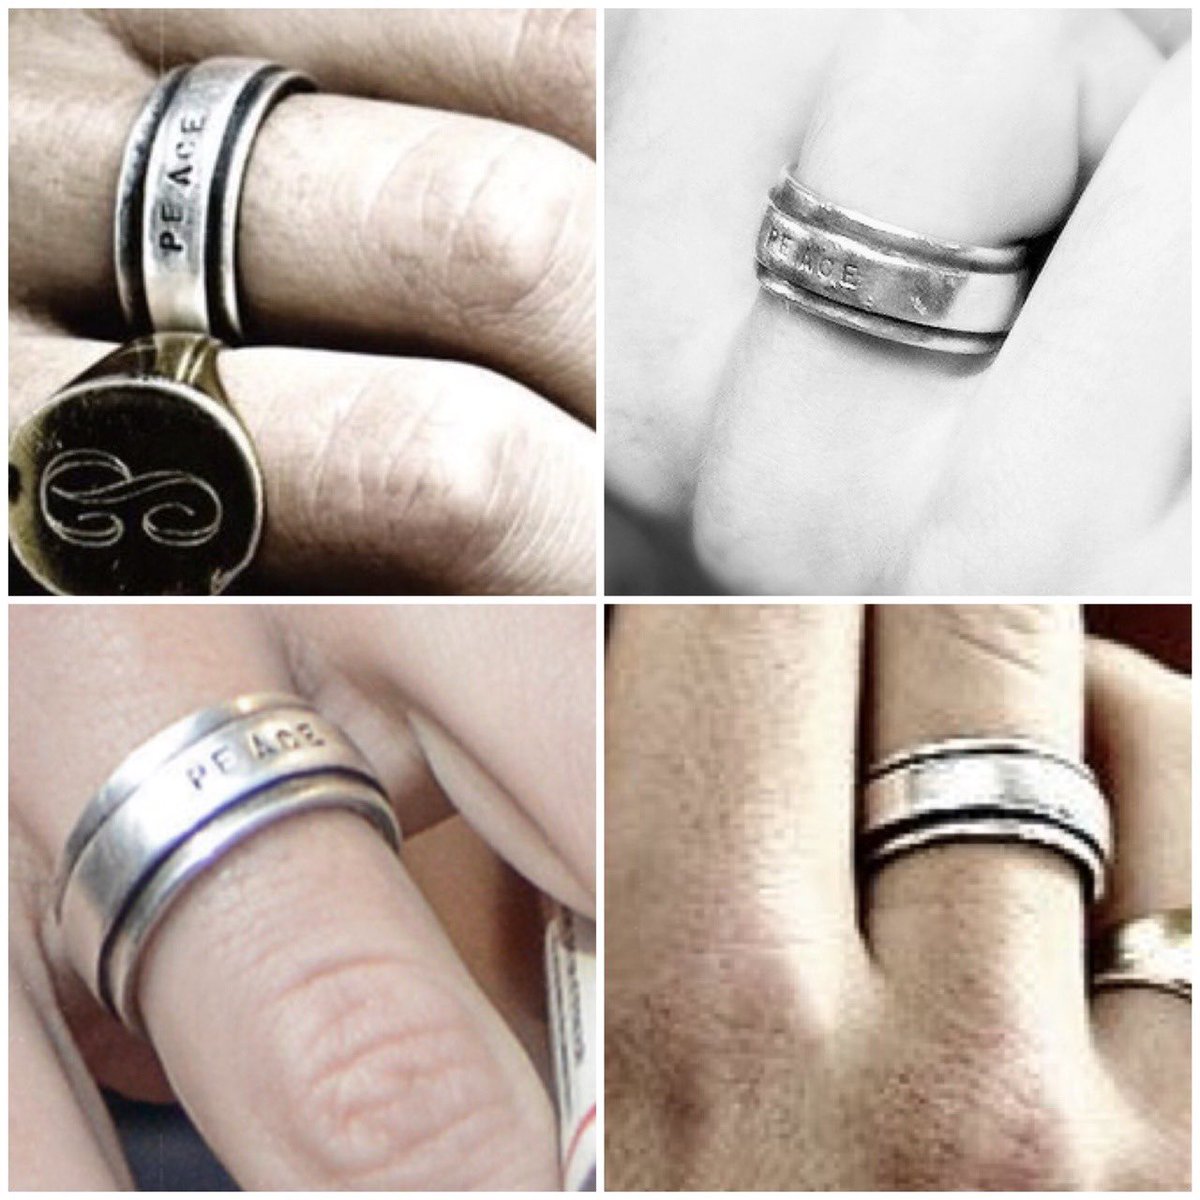 many of us believe the ring is a symbol of love, and similar to a wedding ring. he always wore it on his middle finger which is considered a placement for marriage within the LGBTQ+ community. obviously, we believe louis had given it to him back in 2013